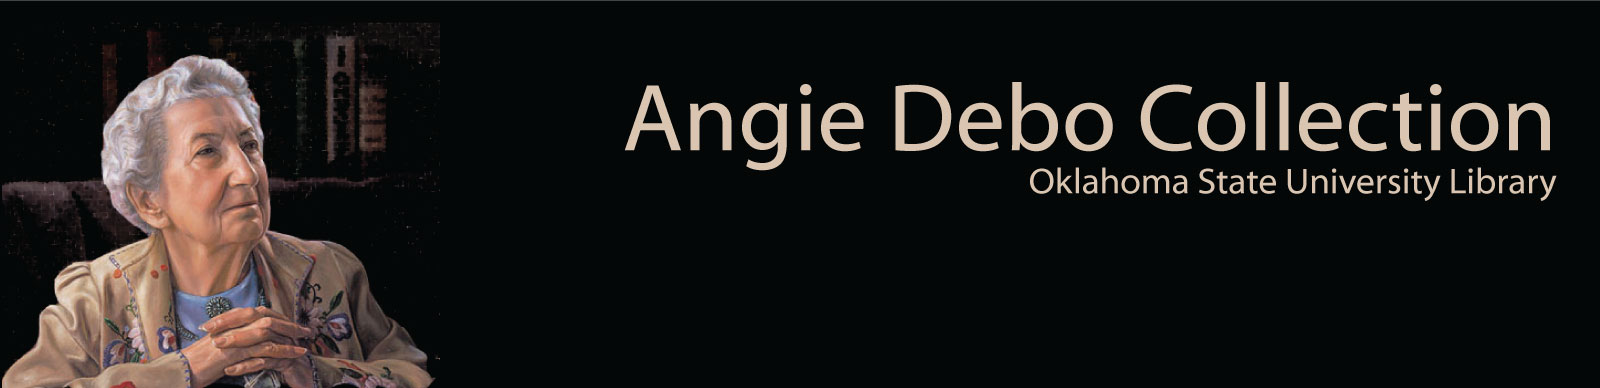 Angie Debo Collection at Oklahoma State University